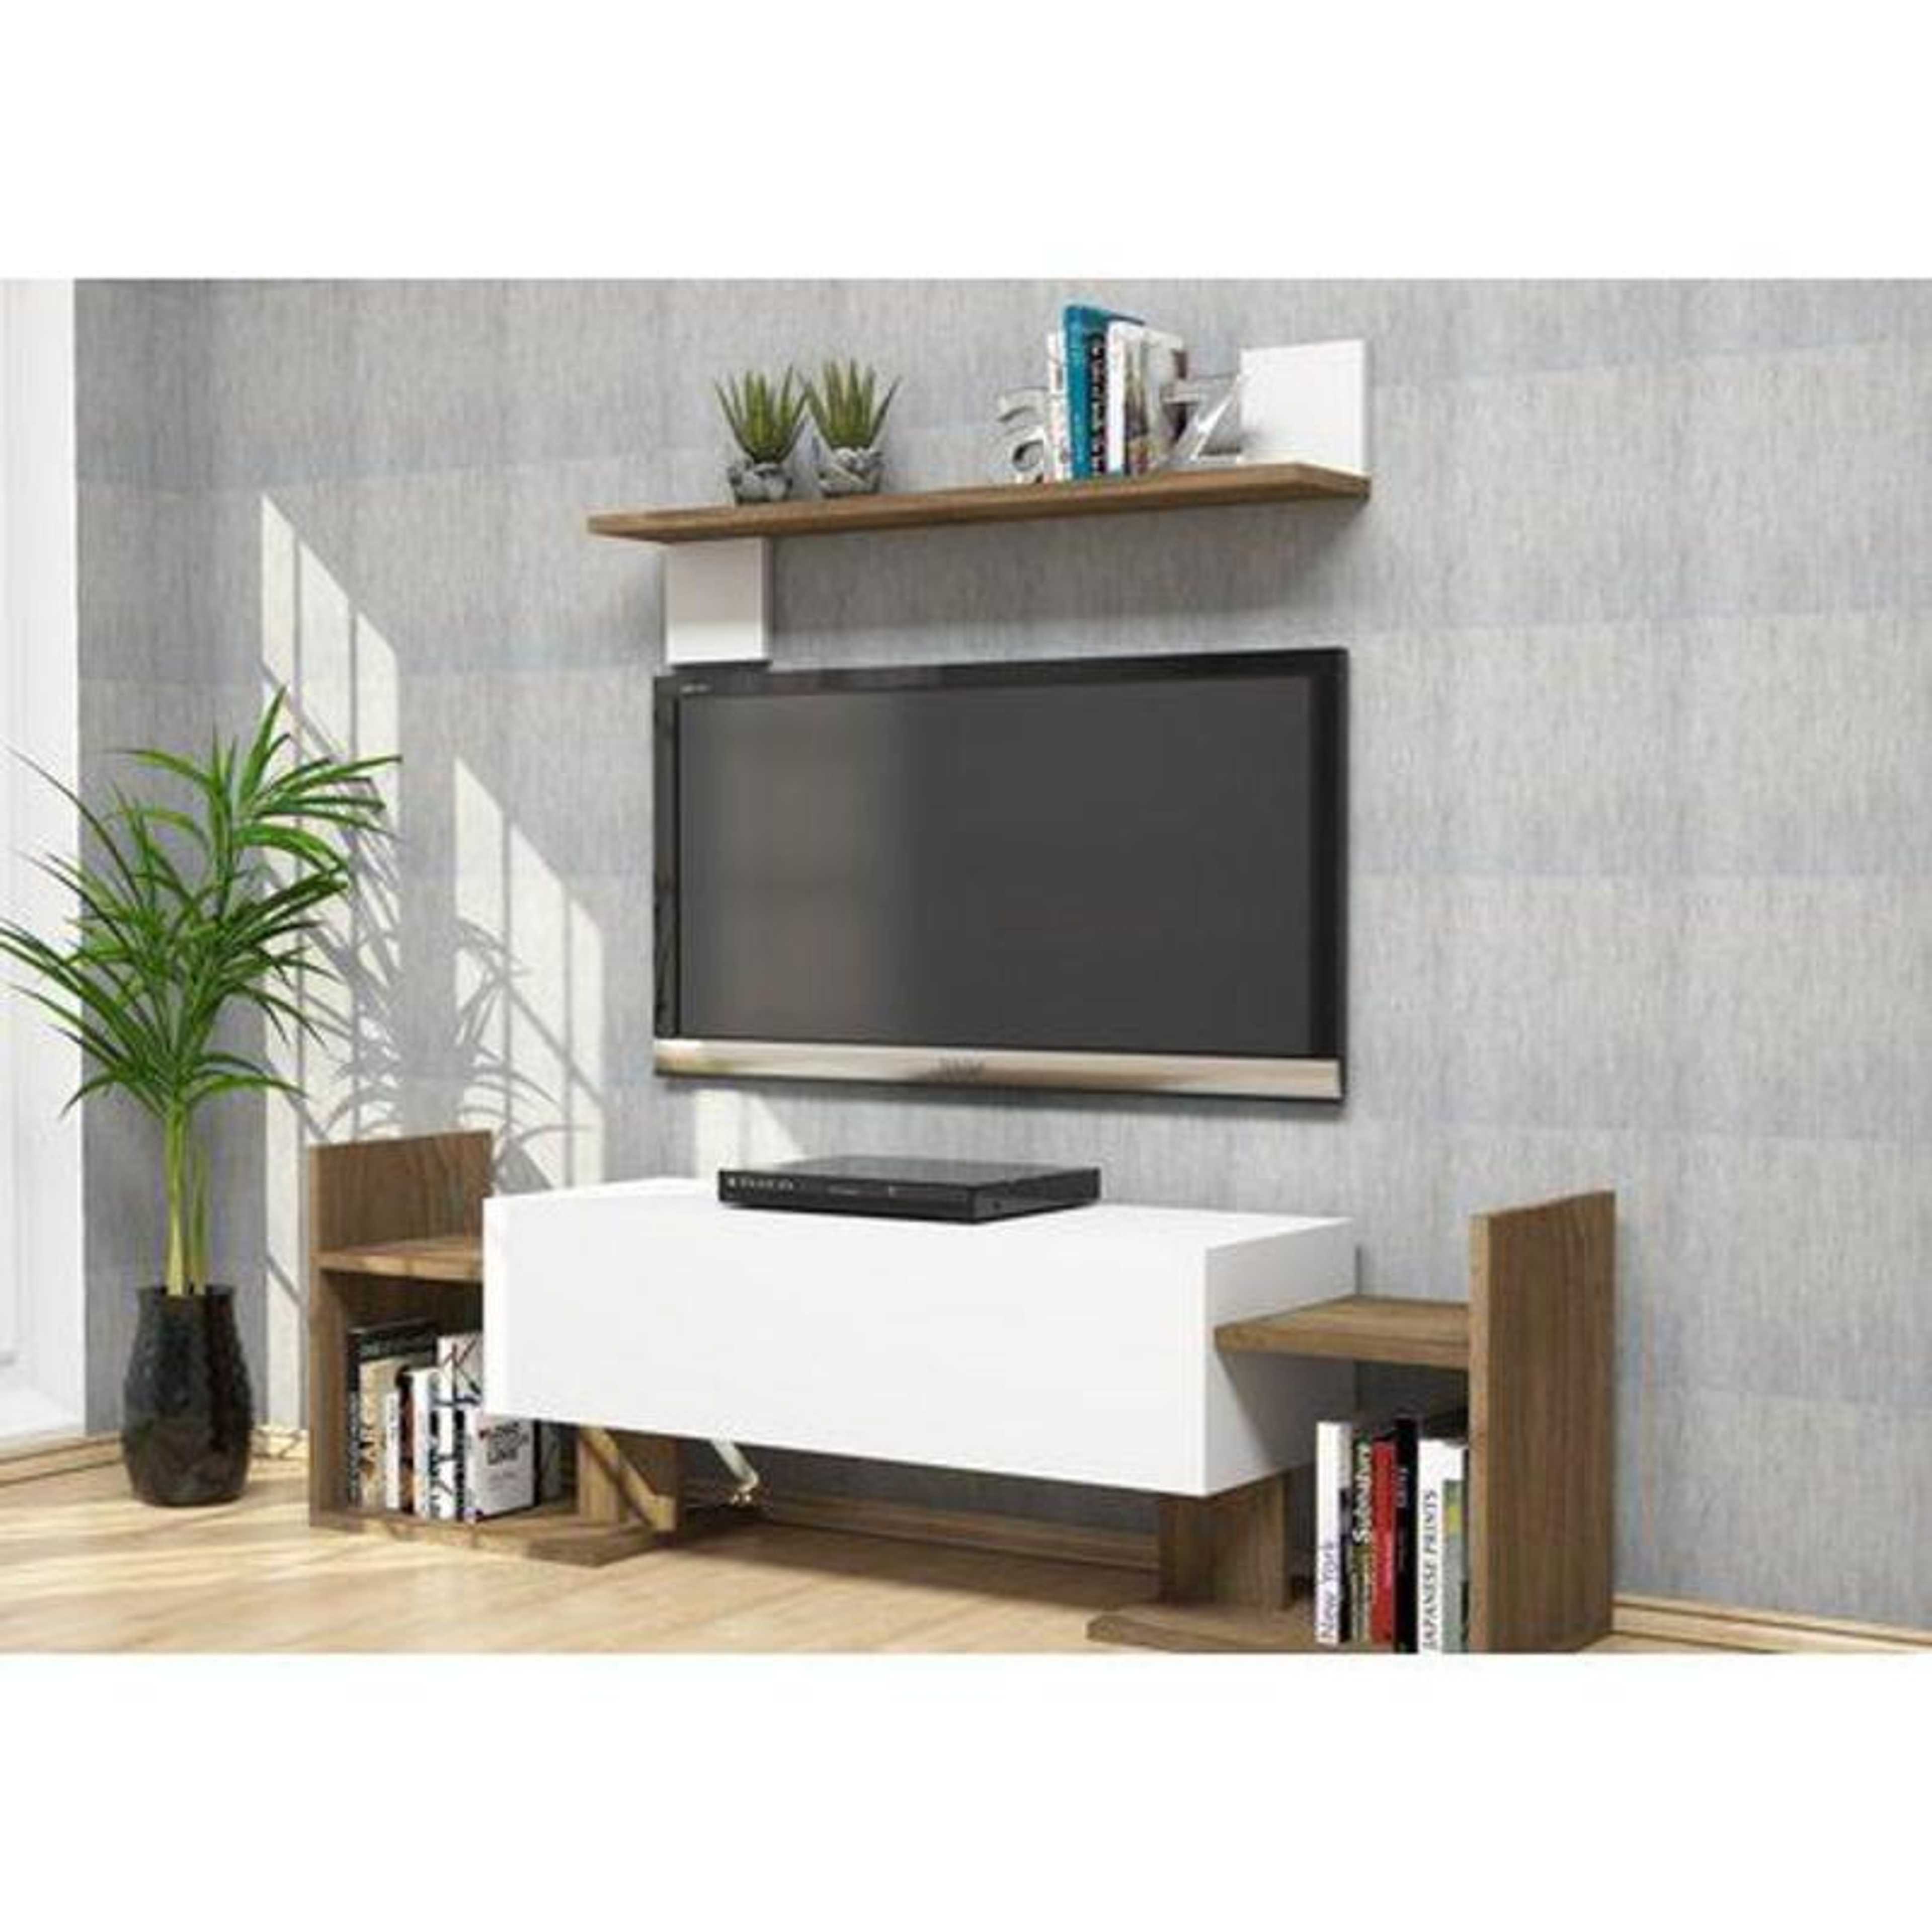 Toheed wood entertainment unit media wall TV stand